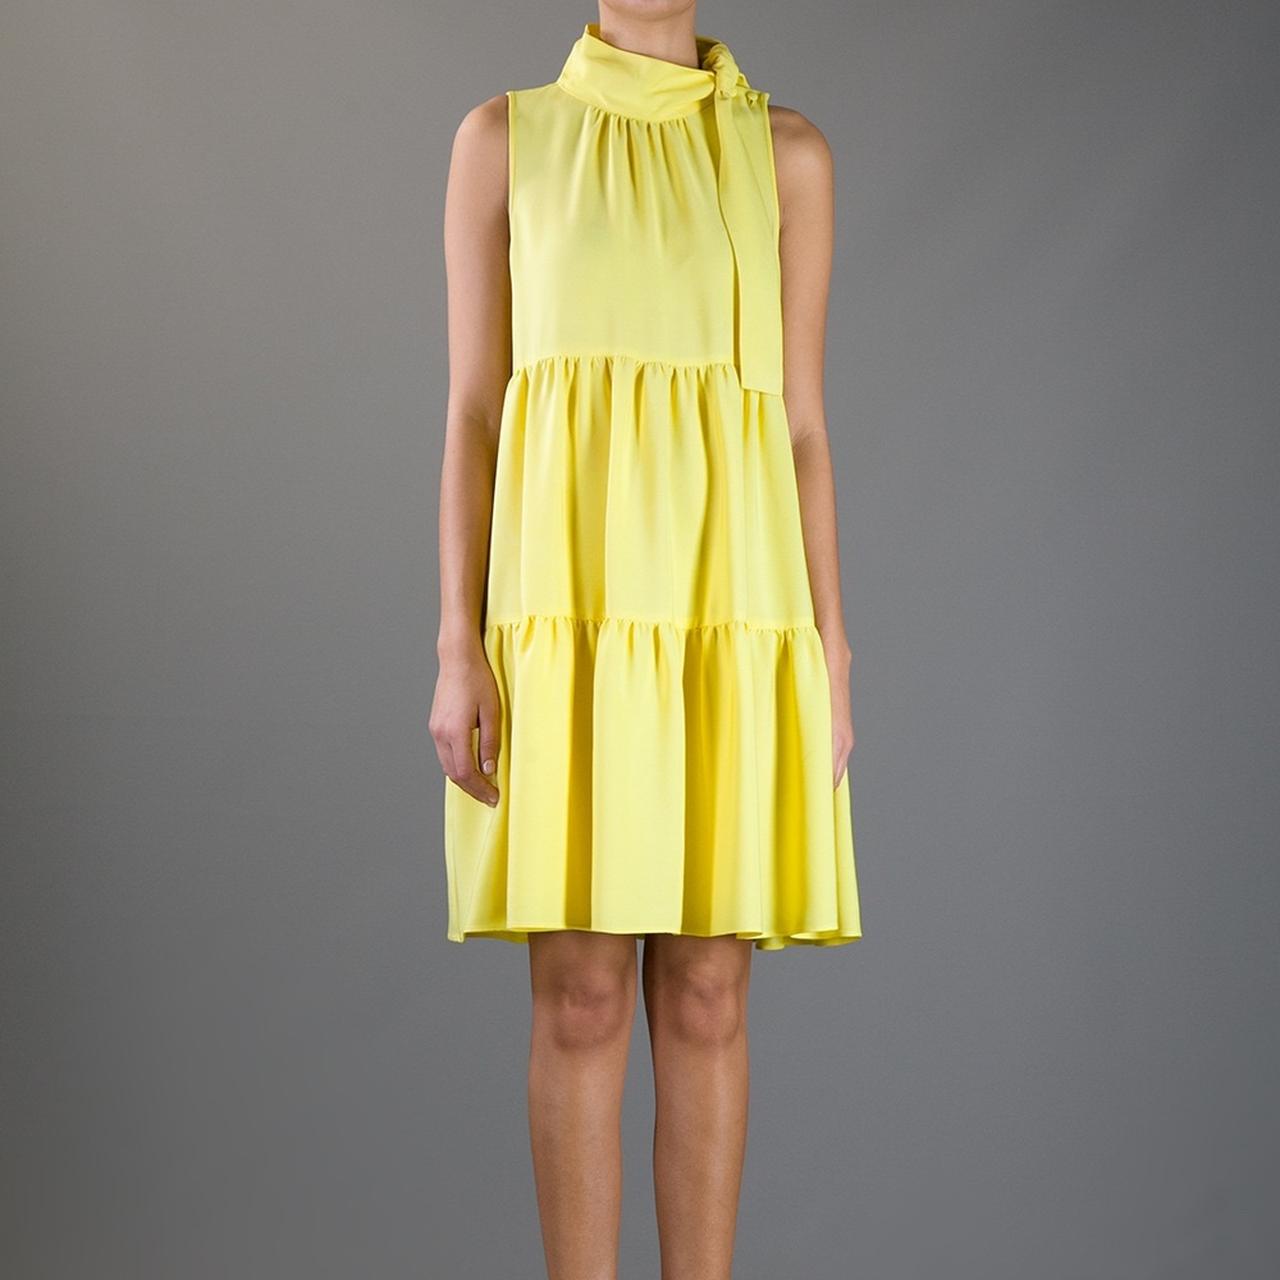 Authentic RED Valentino Yellow layer dress with